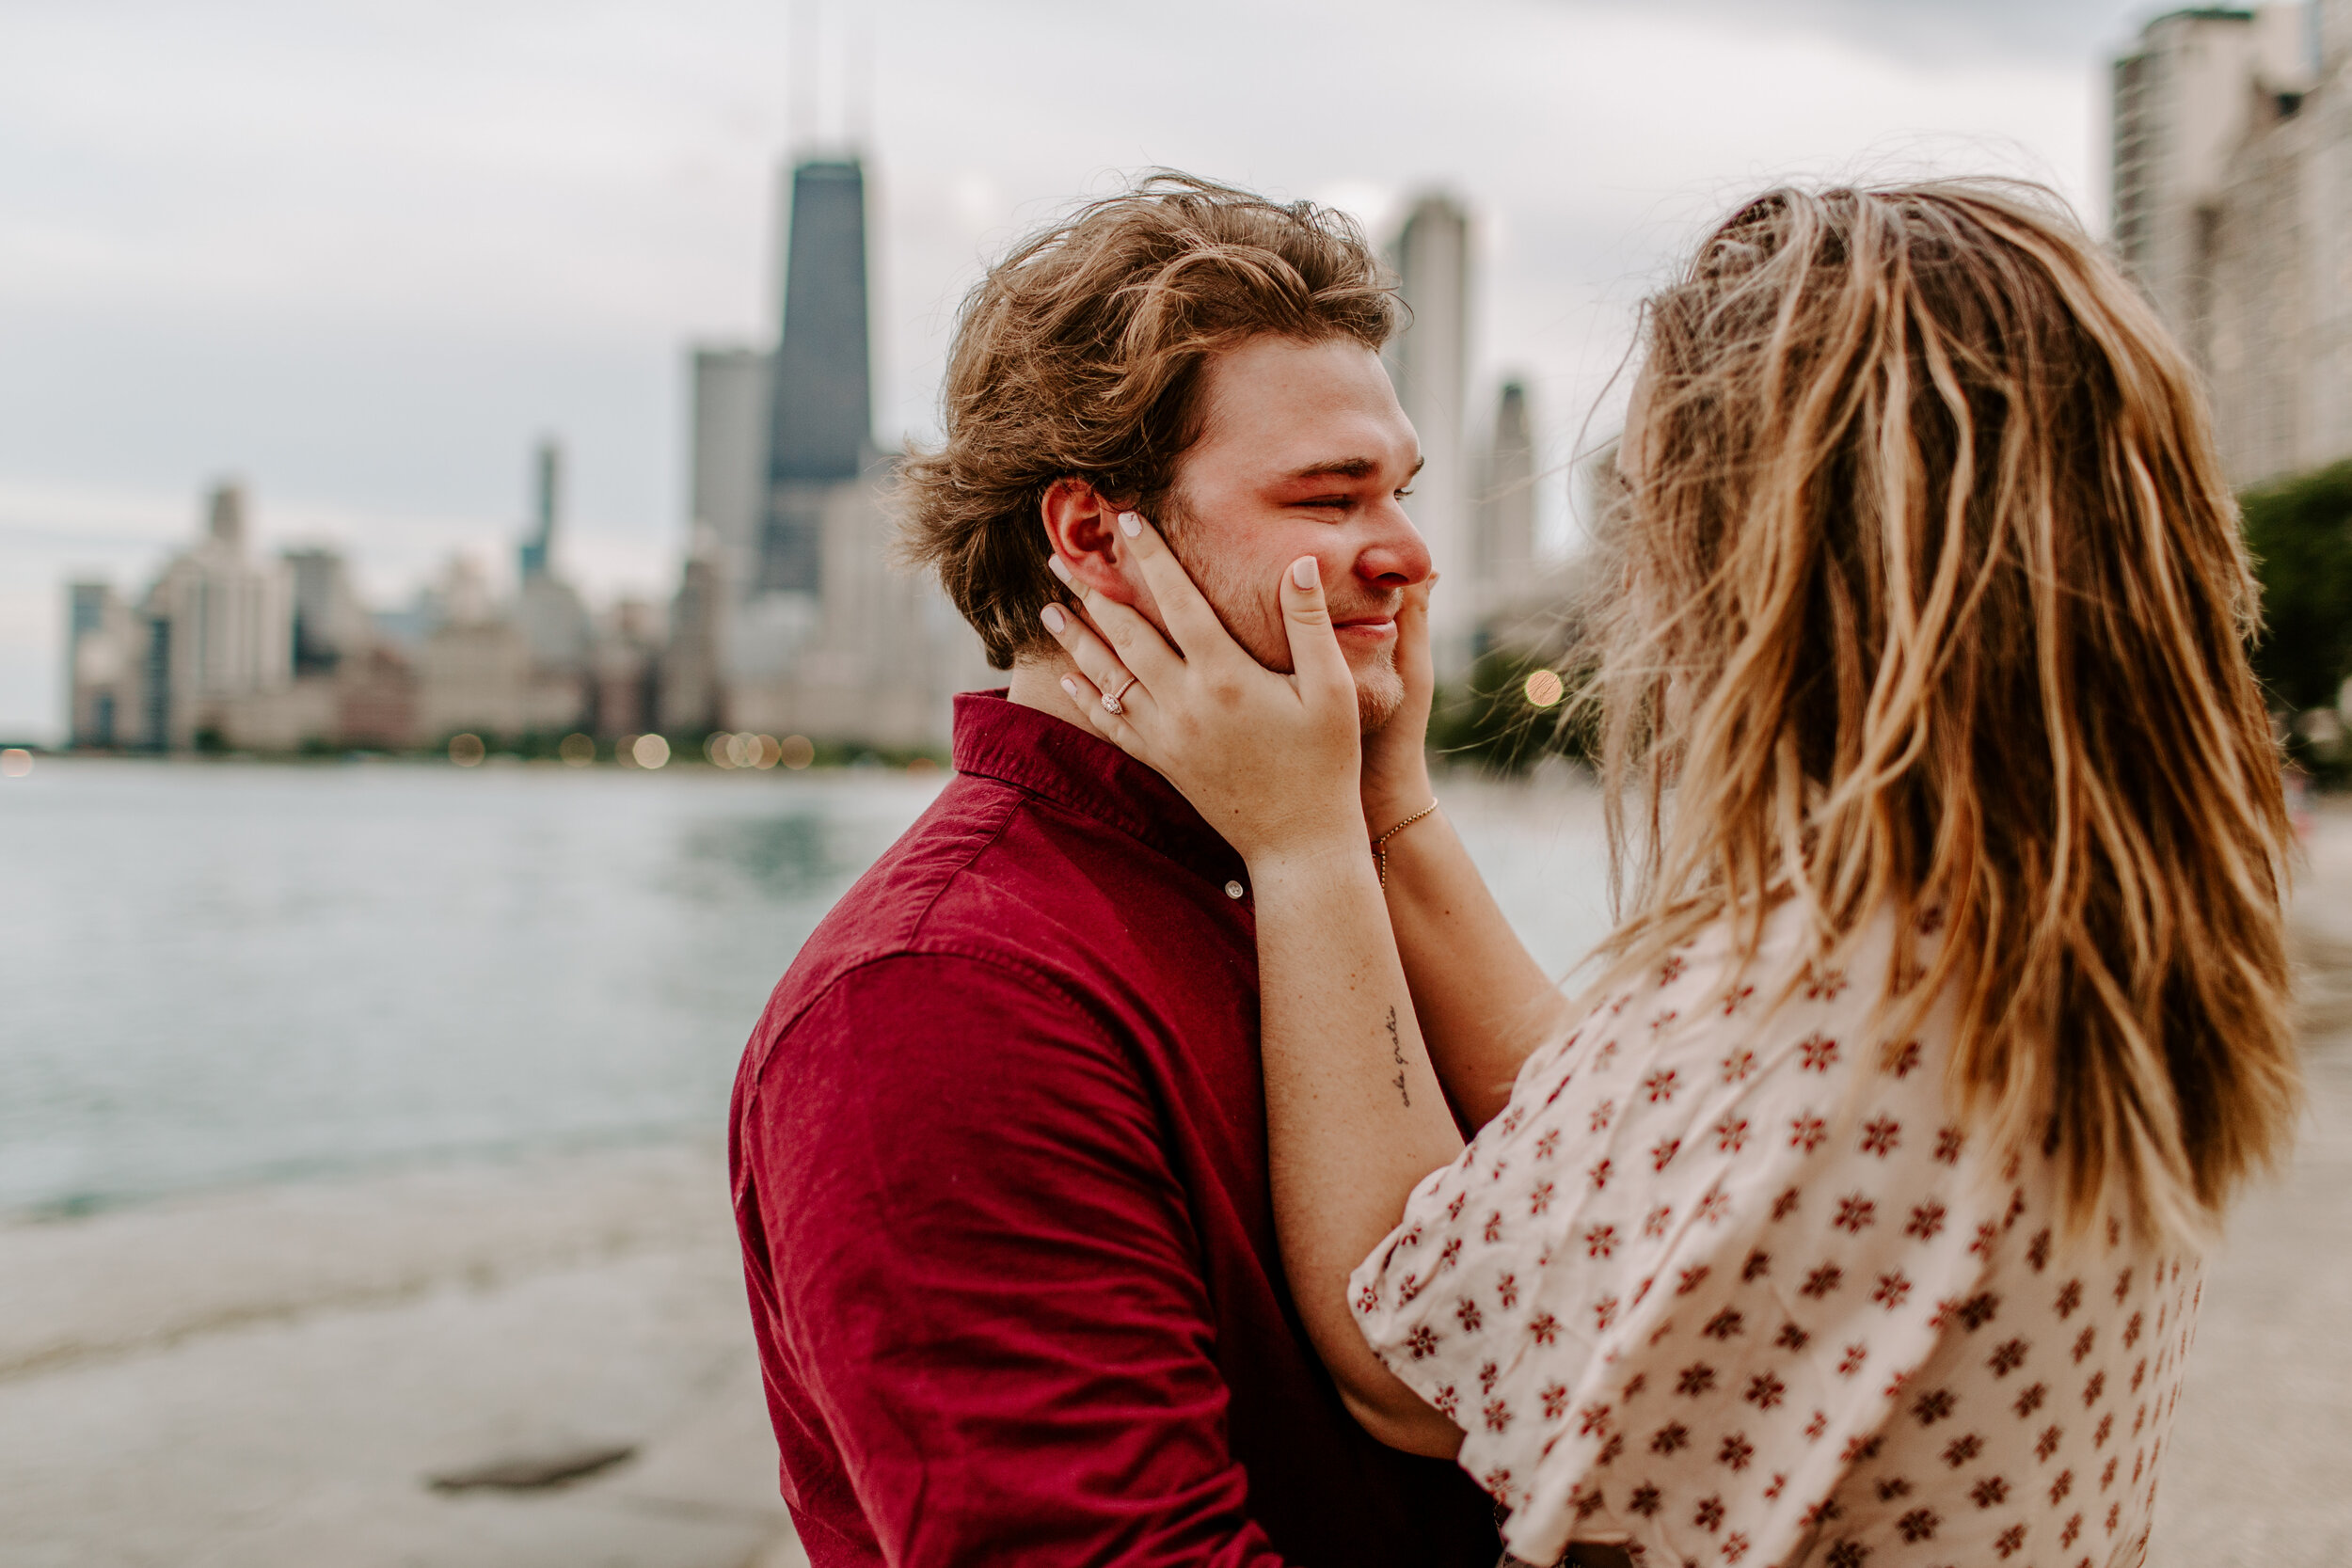  Surprise proposal at North Avenue Beach in Chicago next to Lake Michigan with the Chicago skyline in the back. Woman wears her new engagement ring and holds her fiancee’s face right after he did a surprise proposal, he has tears in his eyes. Lucy B.